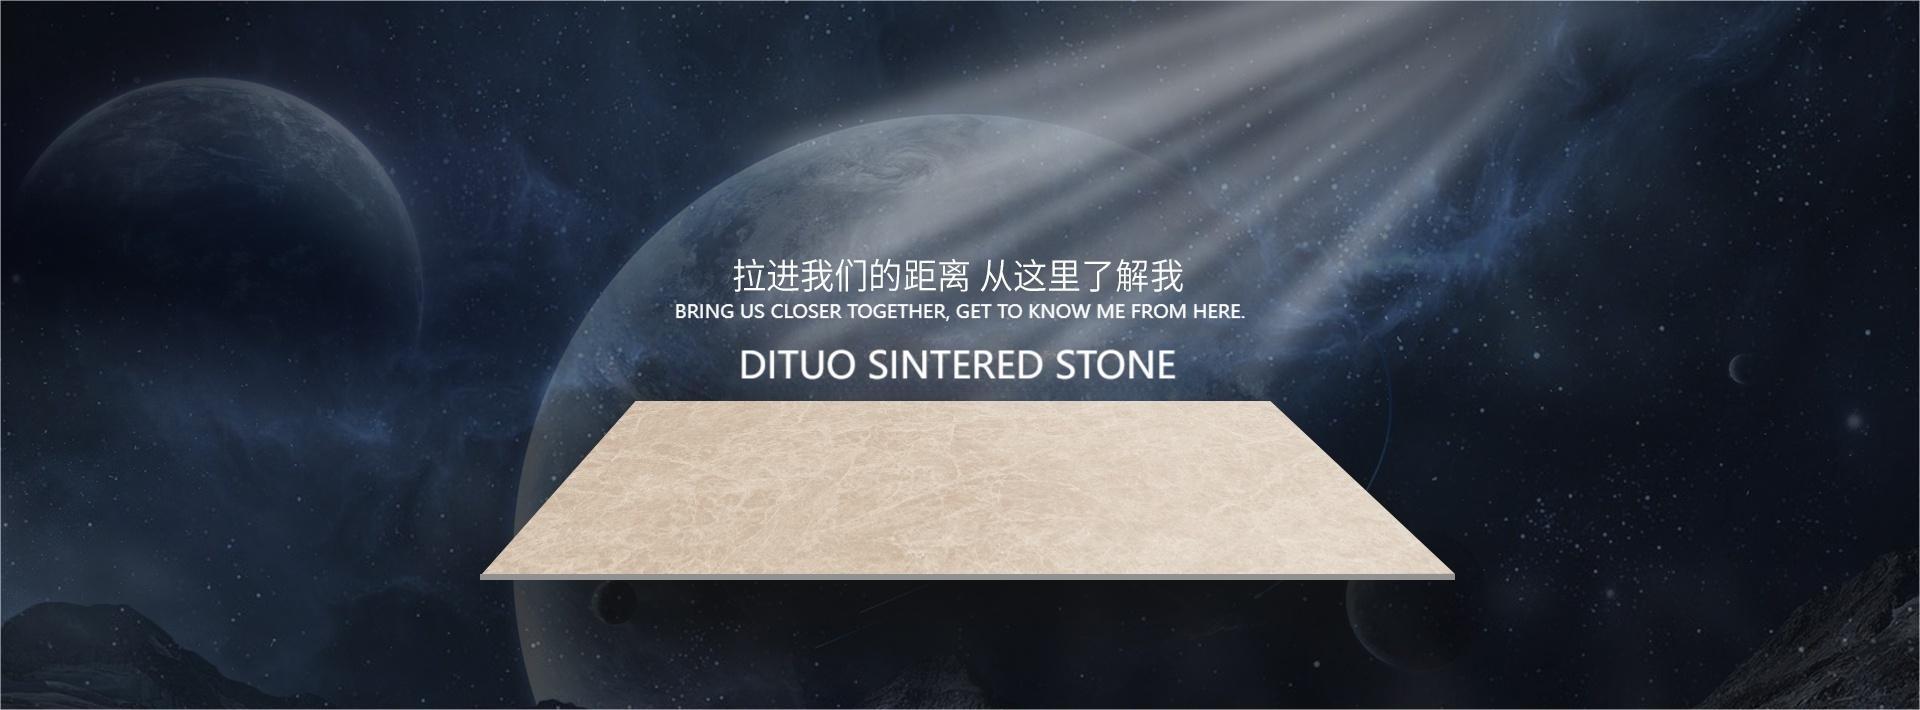 DiTuo Sintered stone - Ceramic surfaces Porcelain slab